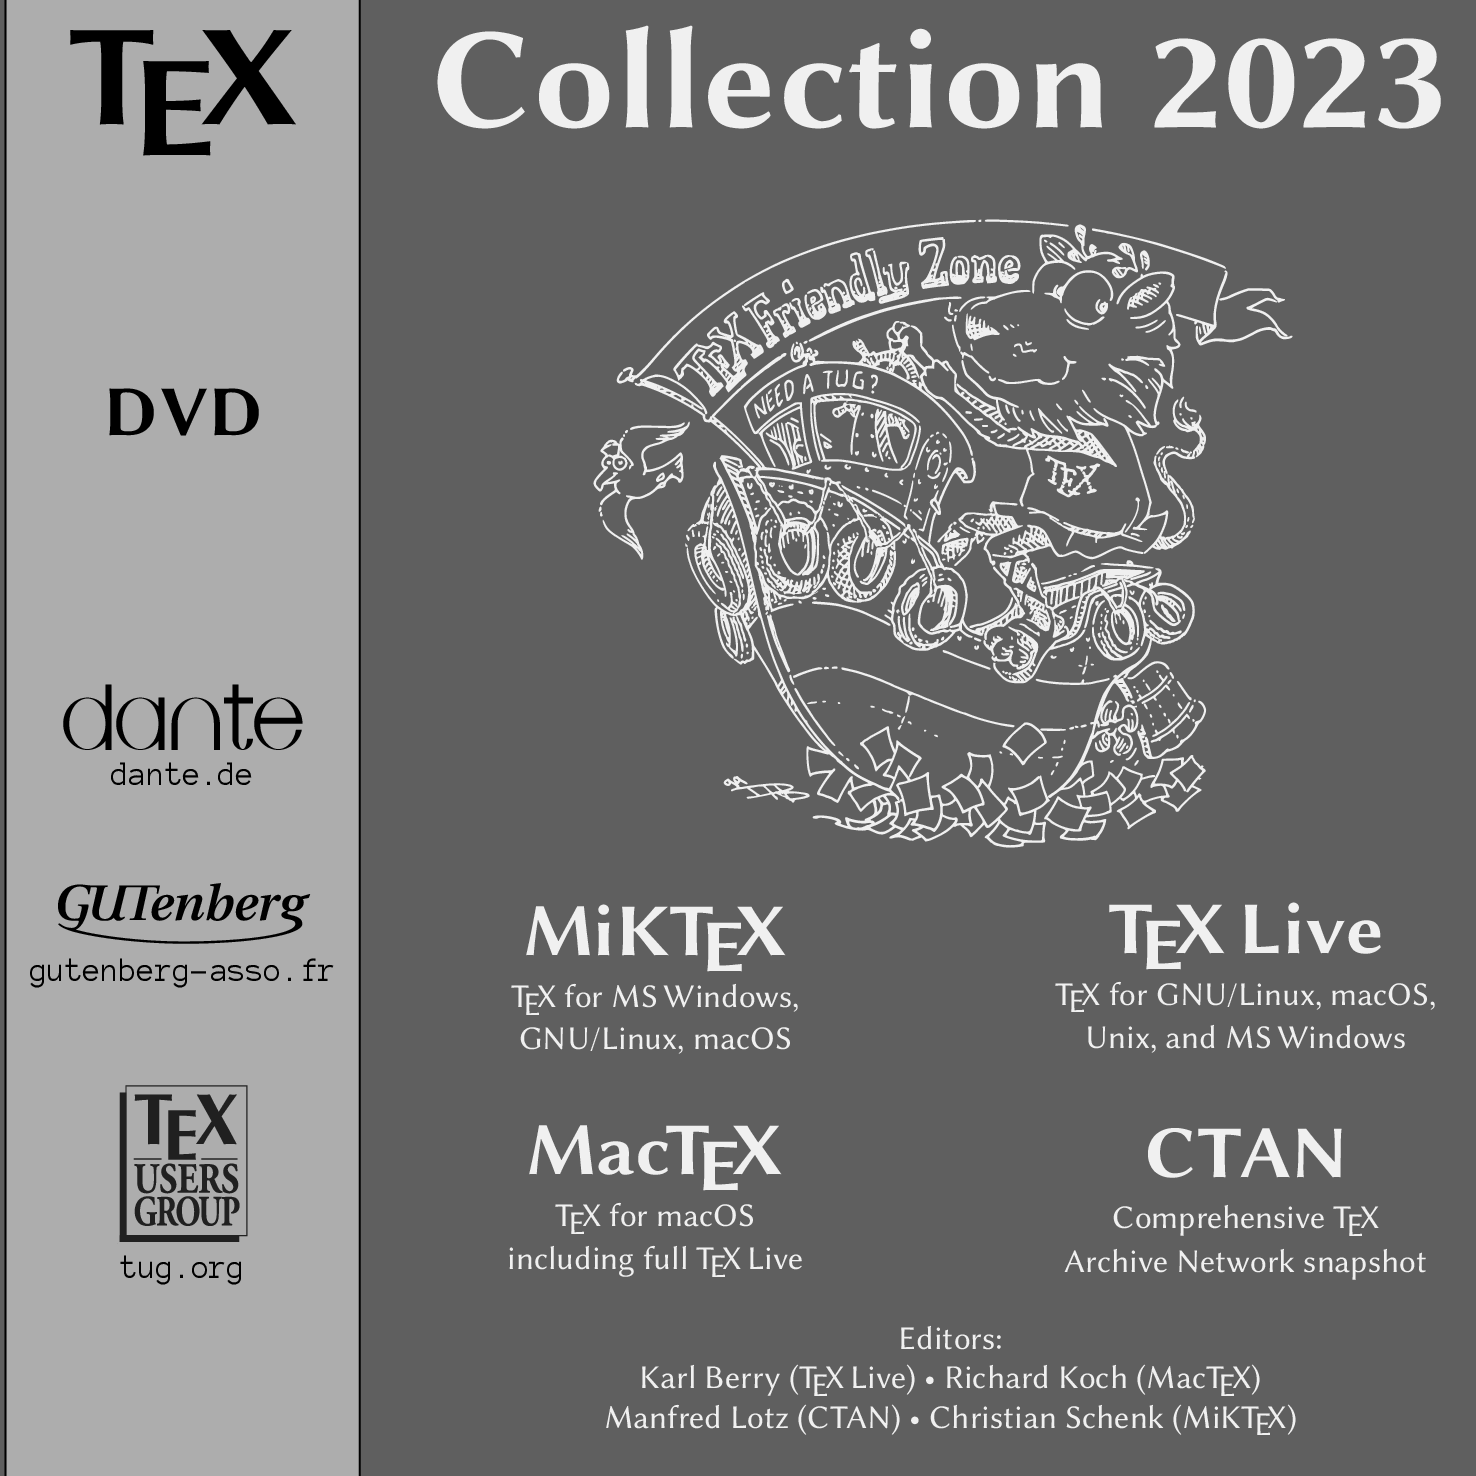 TeX Collection 2023